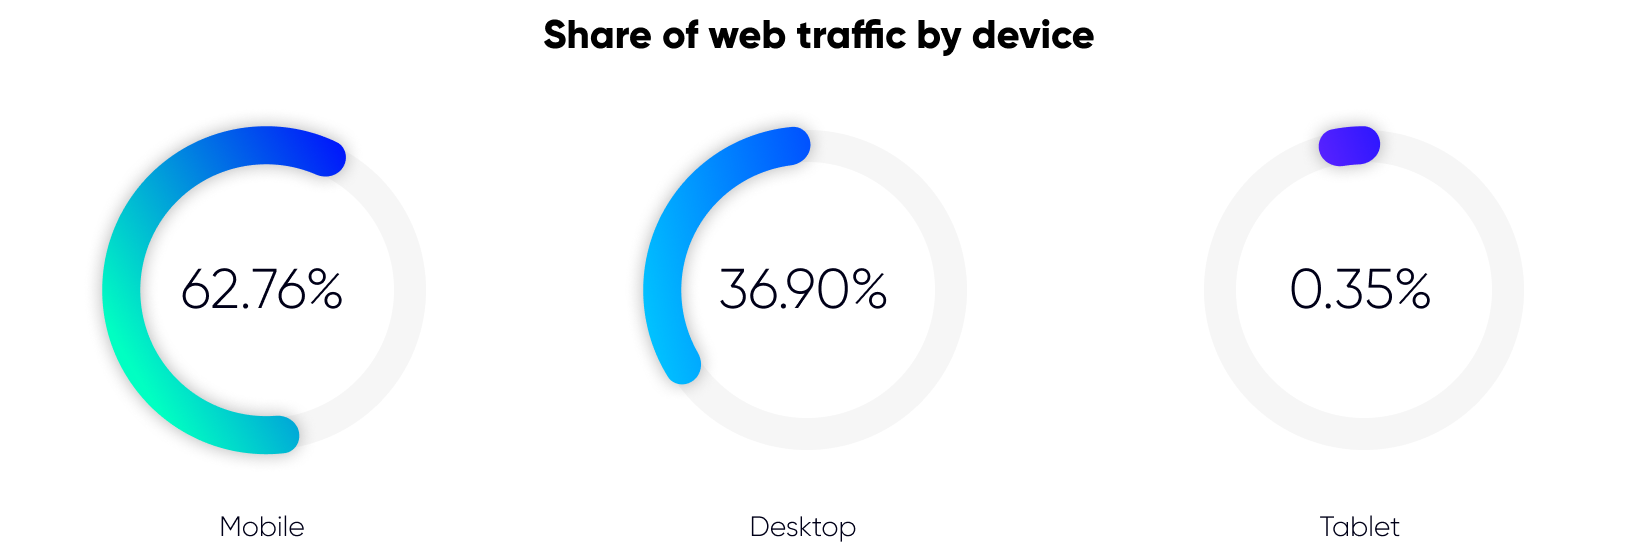 Share web traffic by device in Indonesia